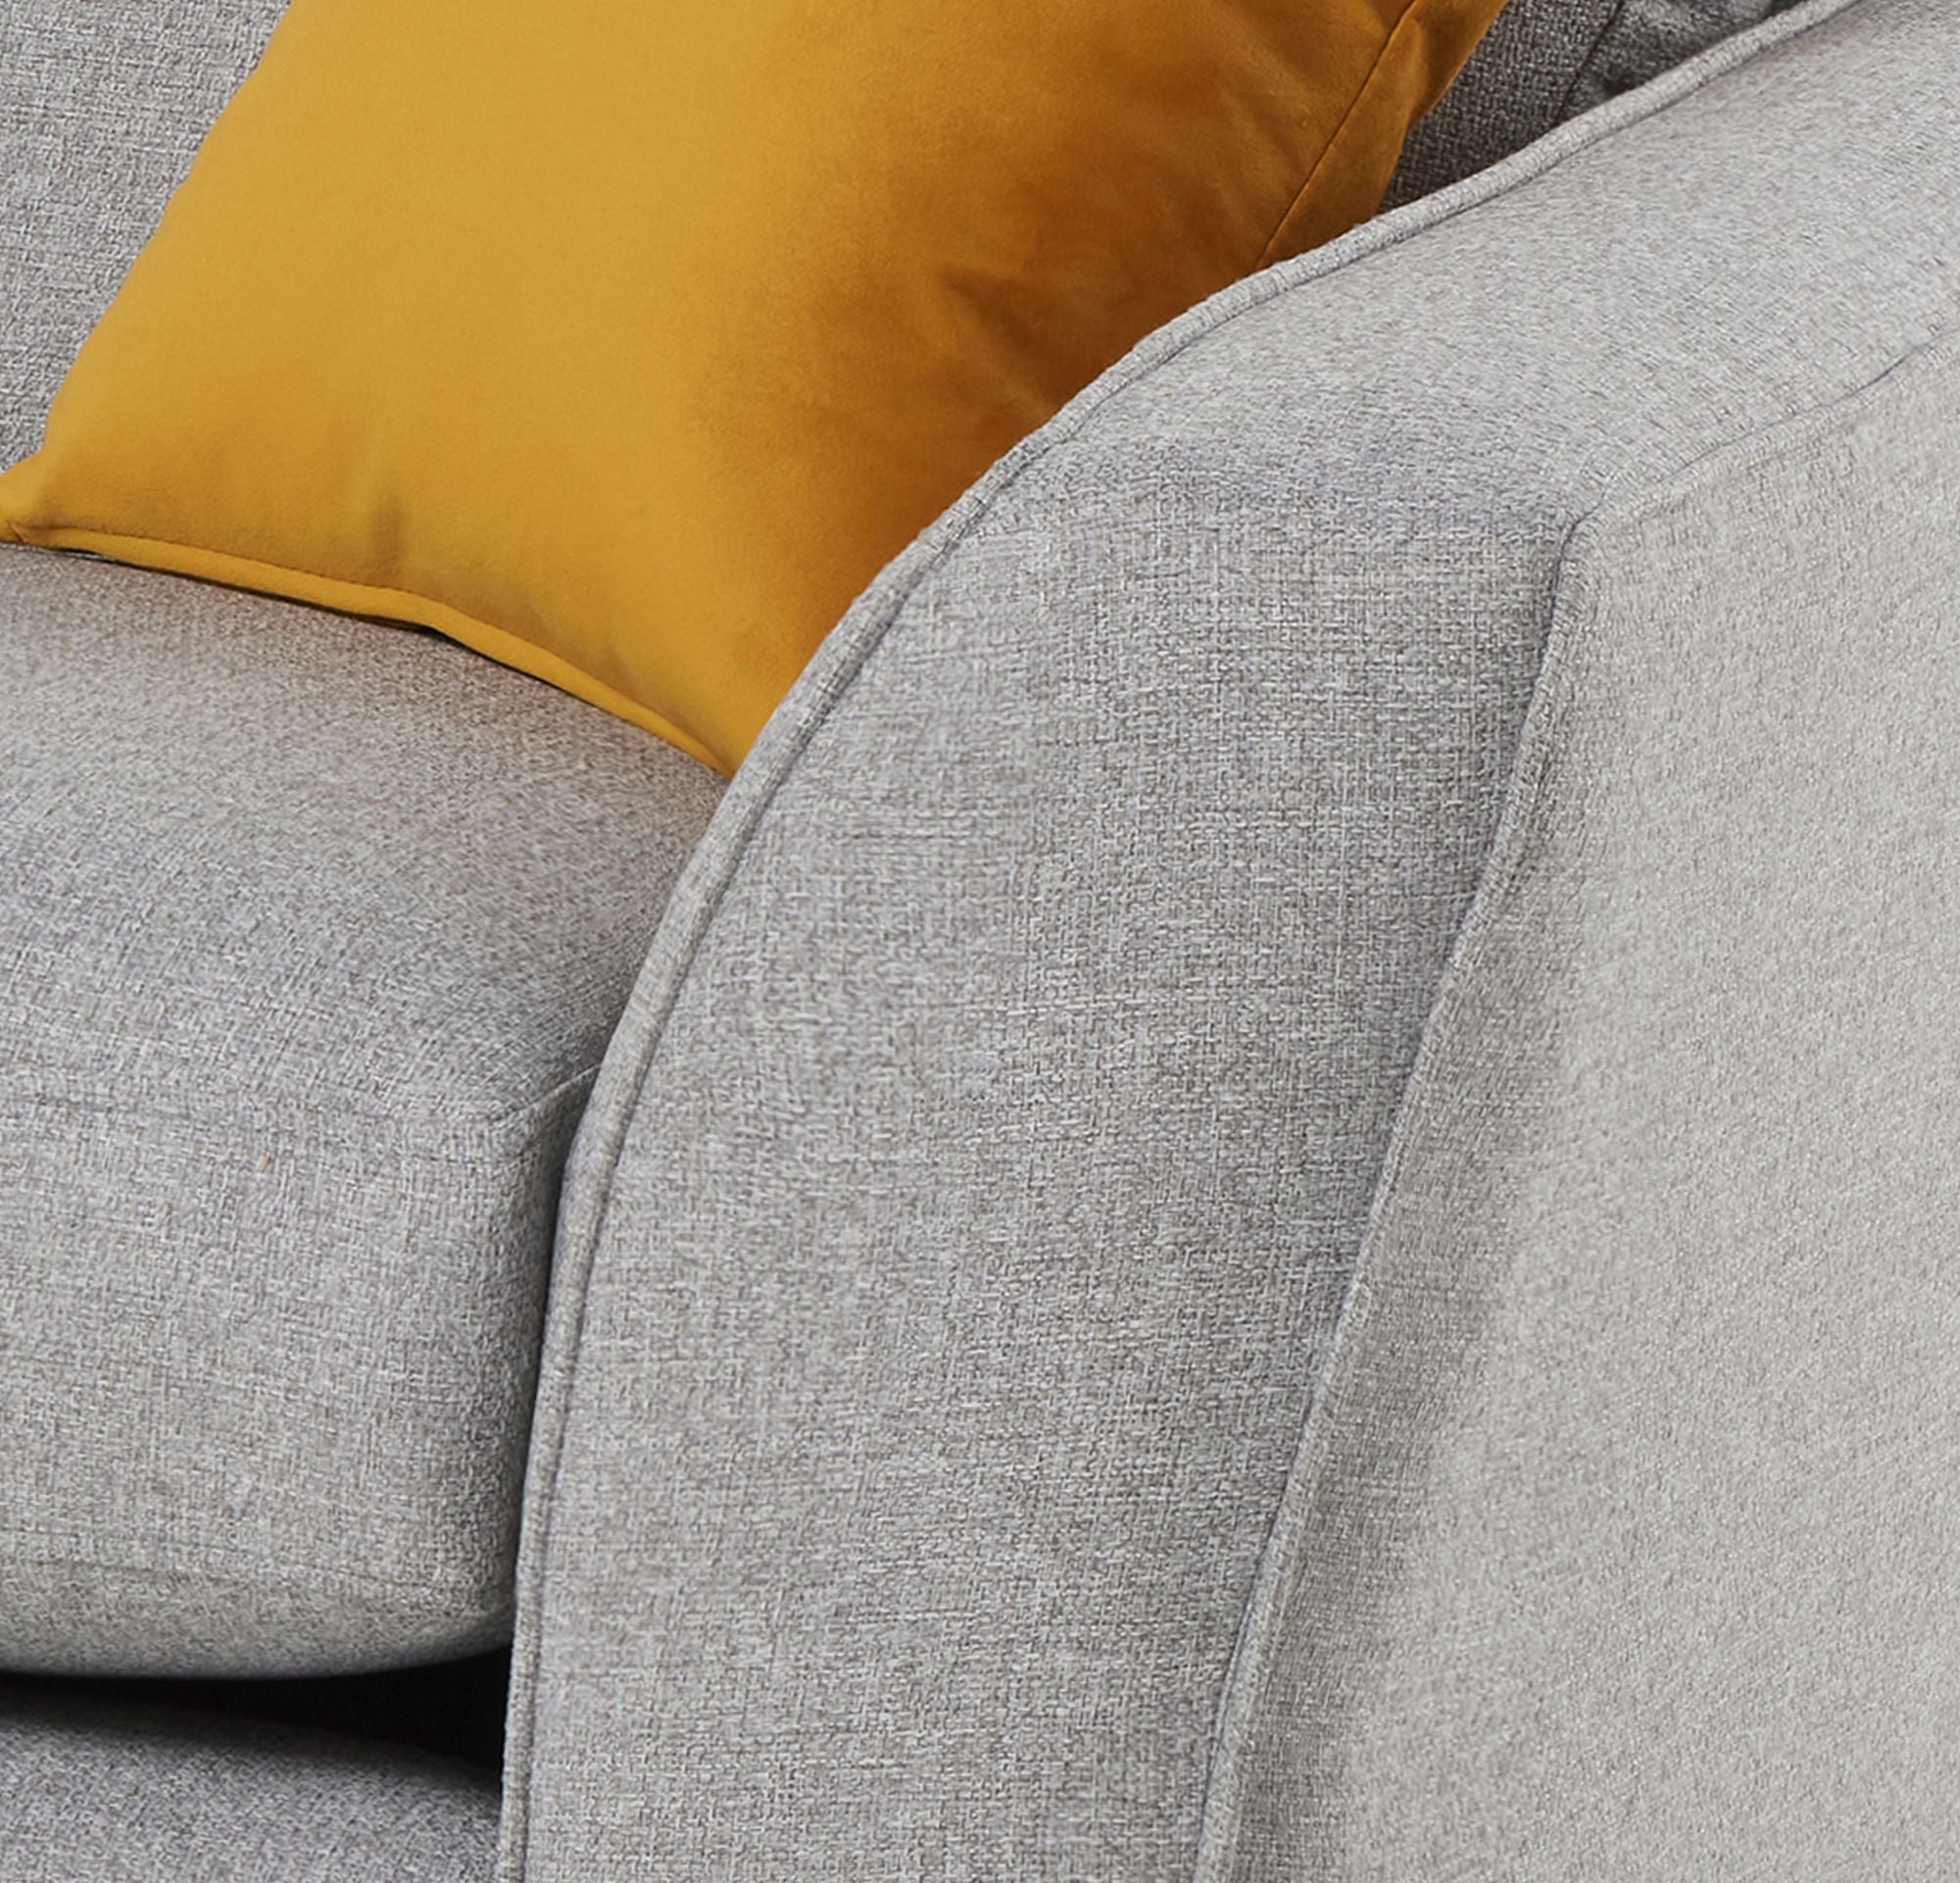 Libby sofa arm in silver showing dual piping detail